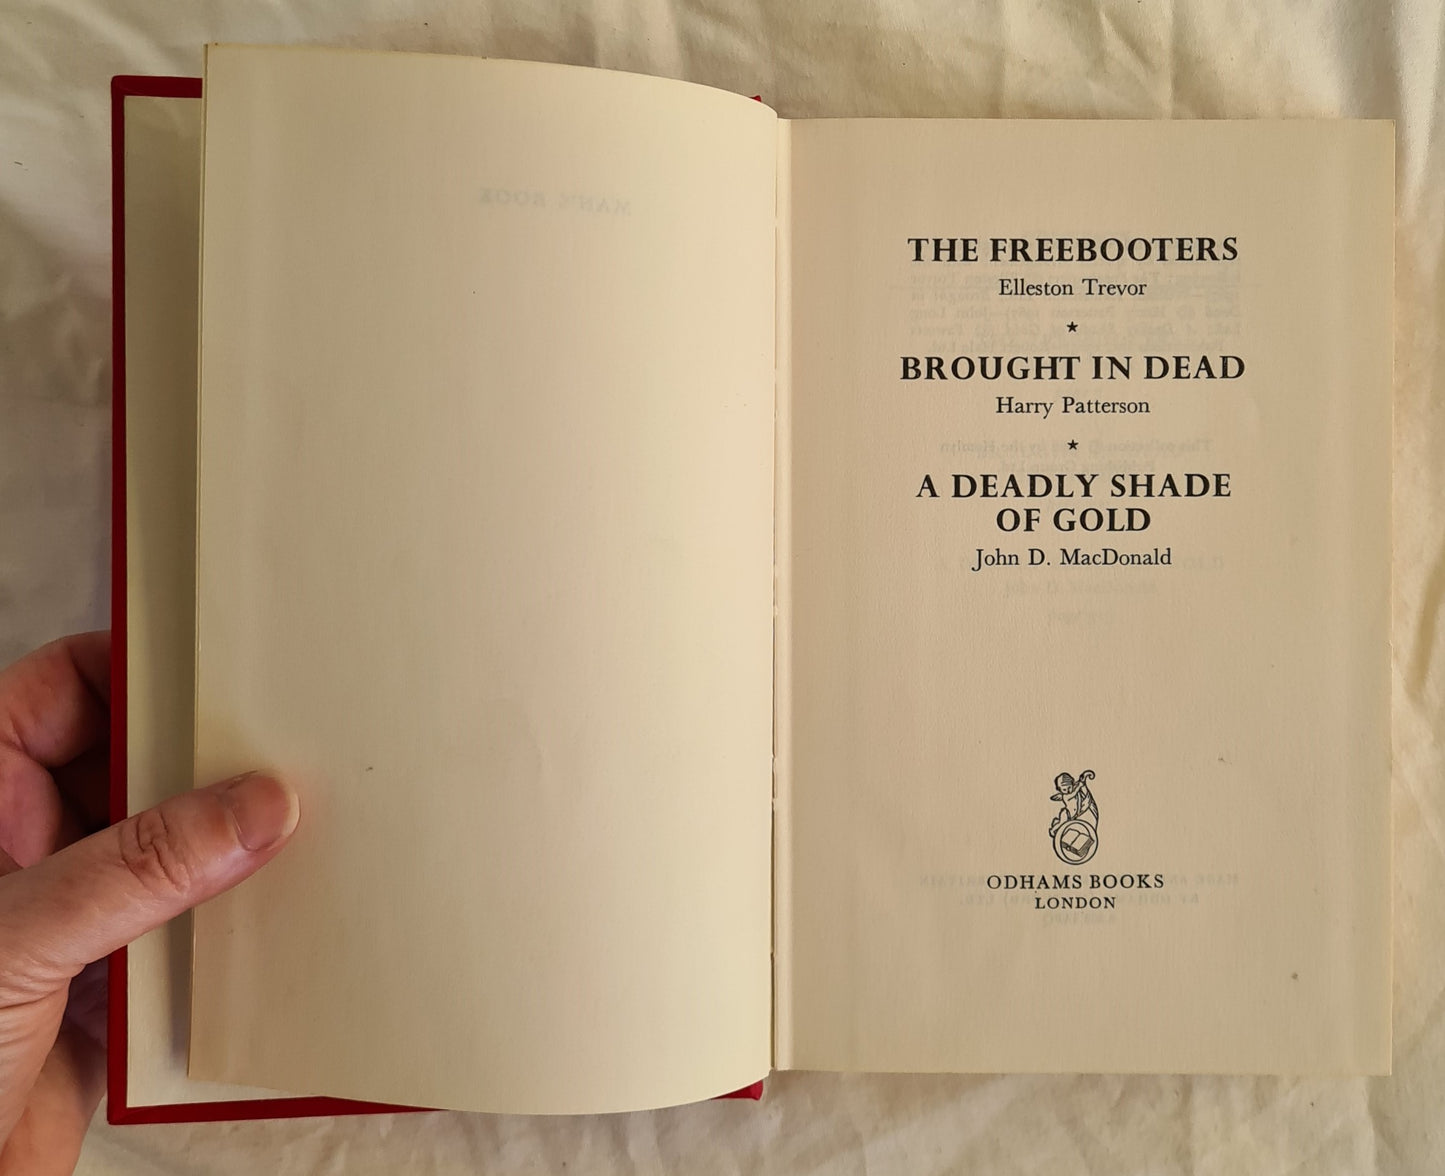 Man’s Book  The Freebooters by Elleston Trevor Brought in Dead by Harry Patterson A Deadly Shade of Gold by John D. Macdonald